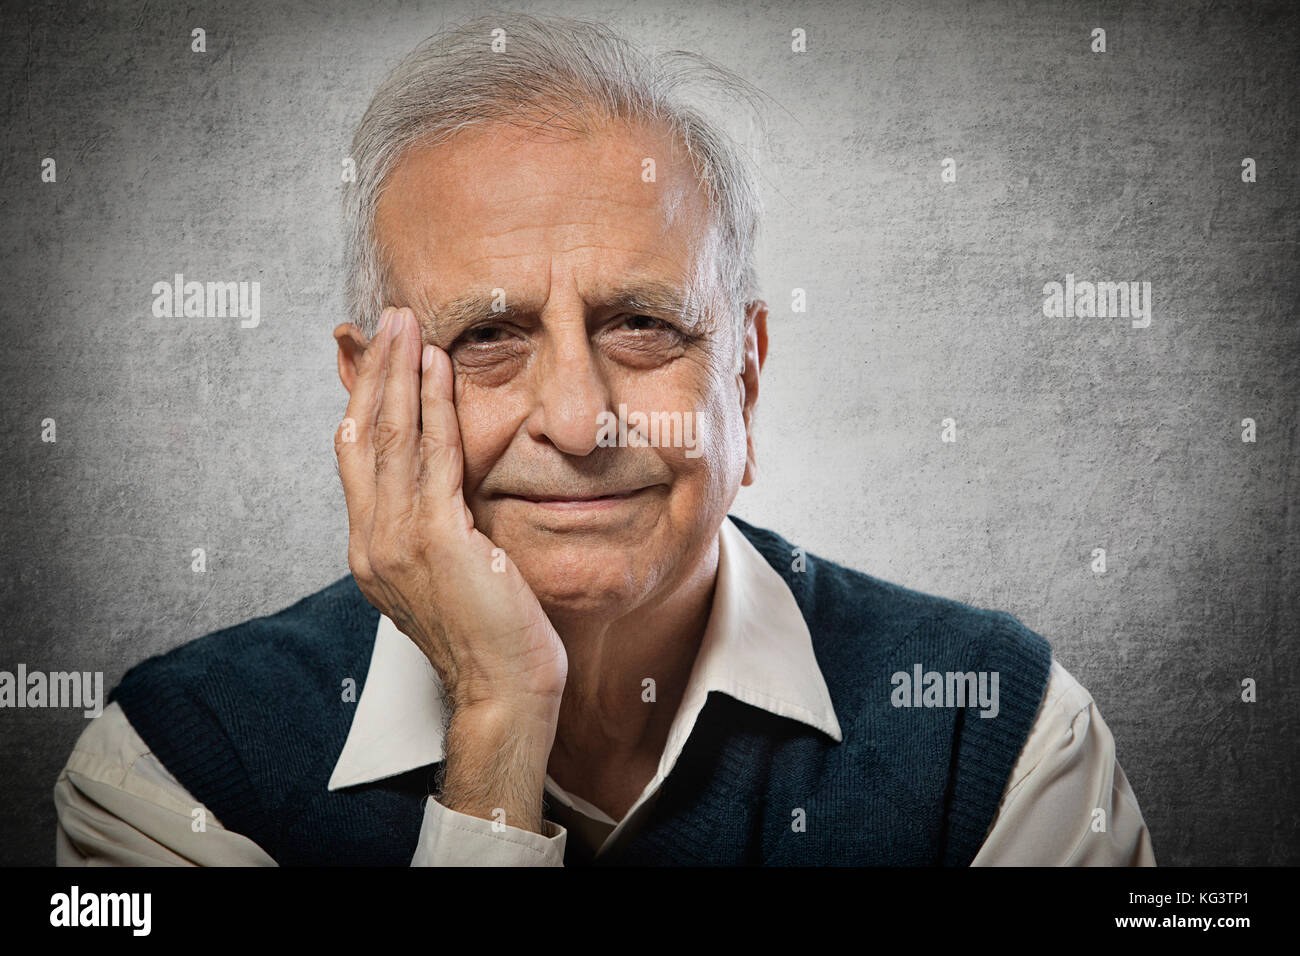 Portrait of smiling senior man with hand on face Stock Photo